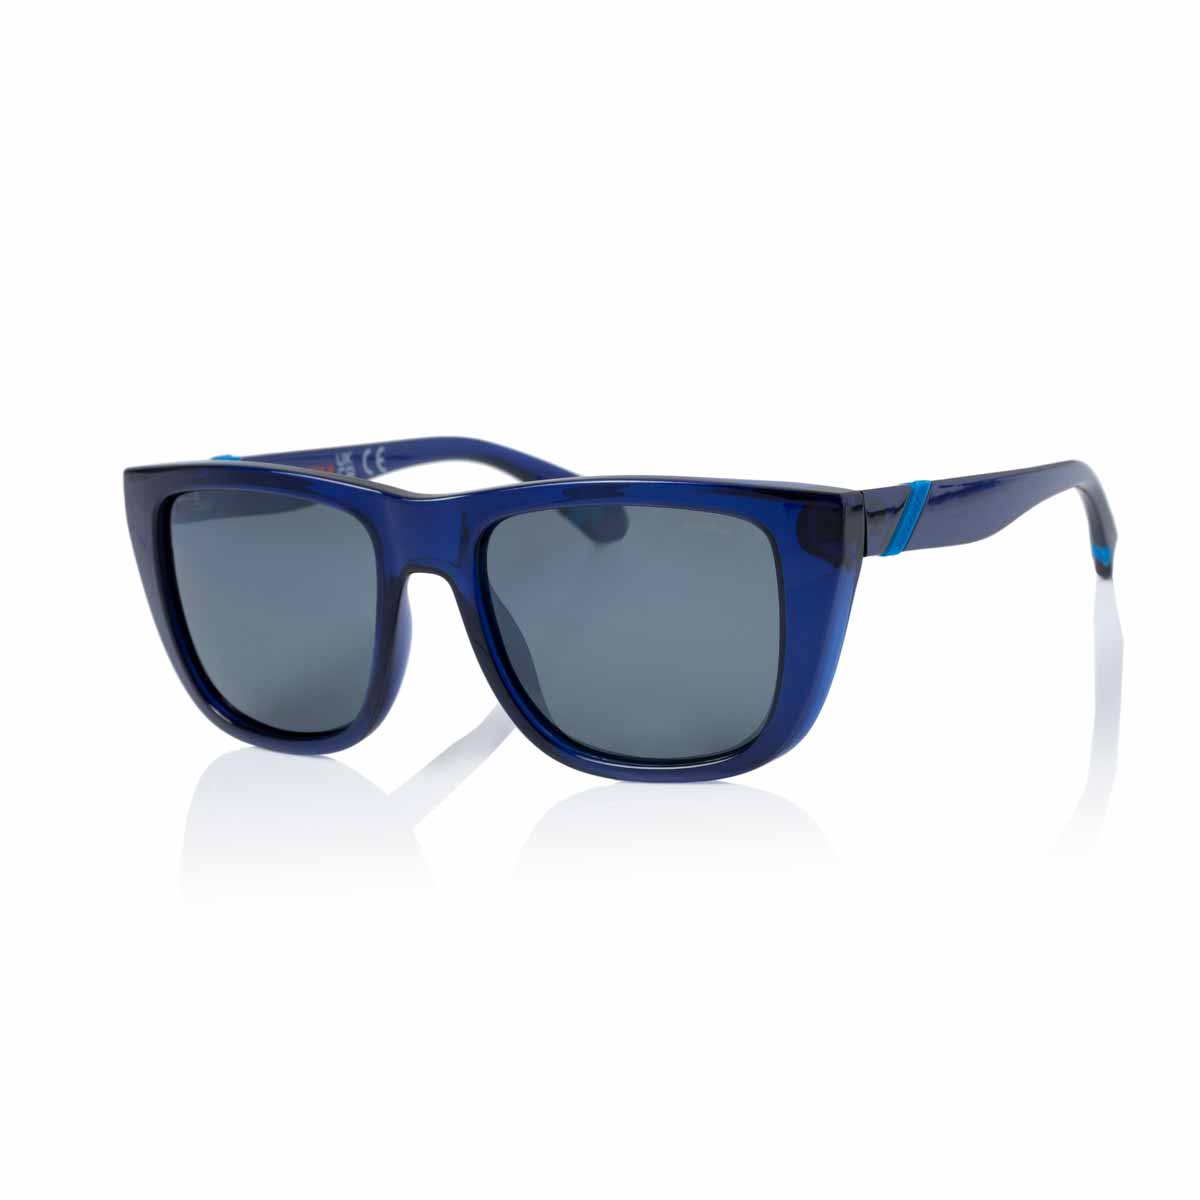 Sunglasses Superdry SDS 5010 – 106P Navy / Blue Smoke with silver mirror